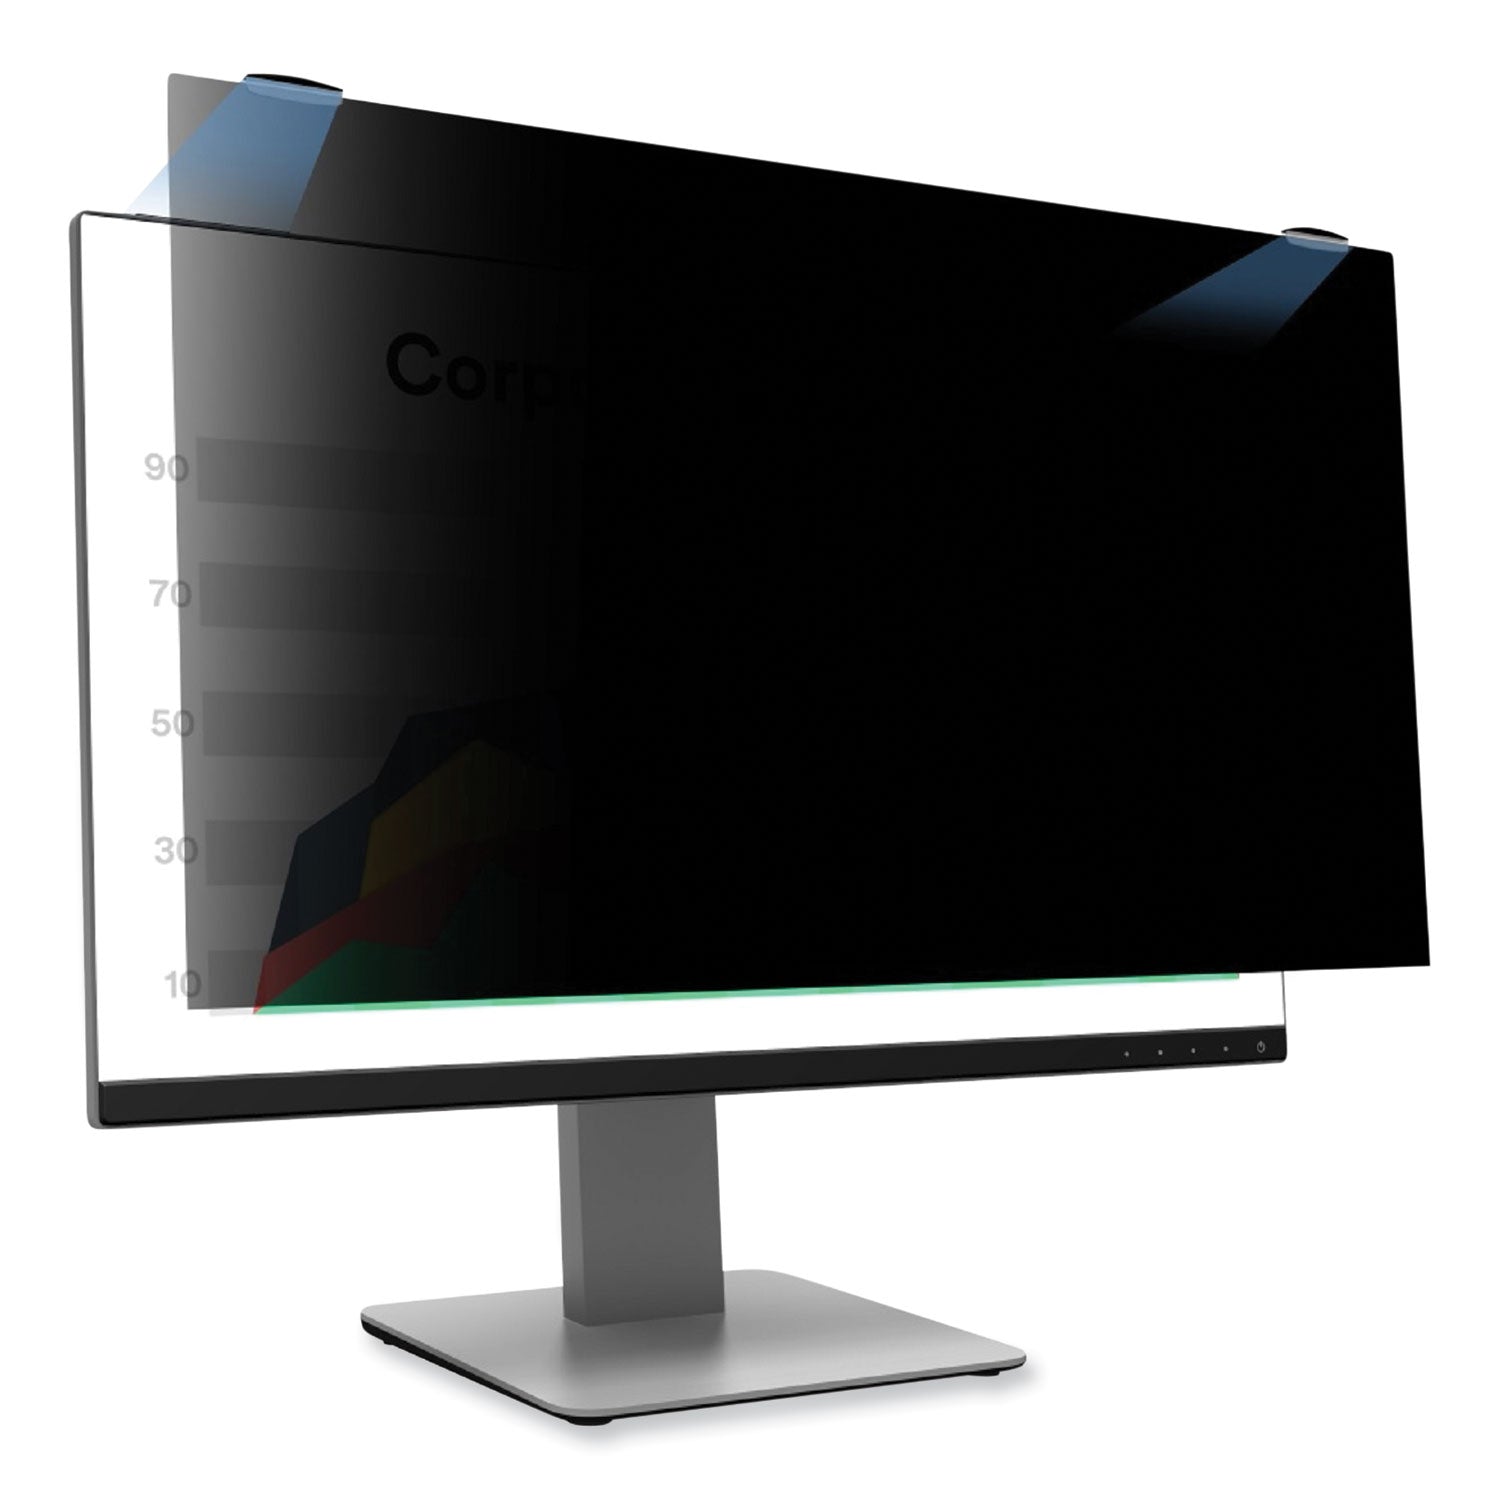 comply-magnetic-attach-privacy-filter-for-24-widescreen-flat-panel-monitor-169-aspect-ratio_mmmpf240w9em - 1